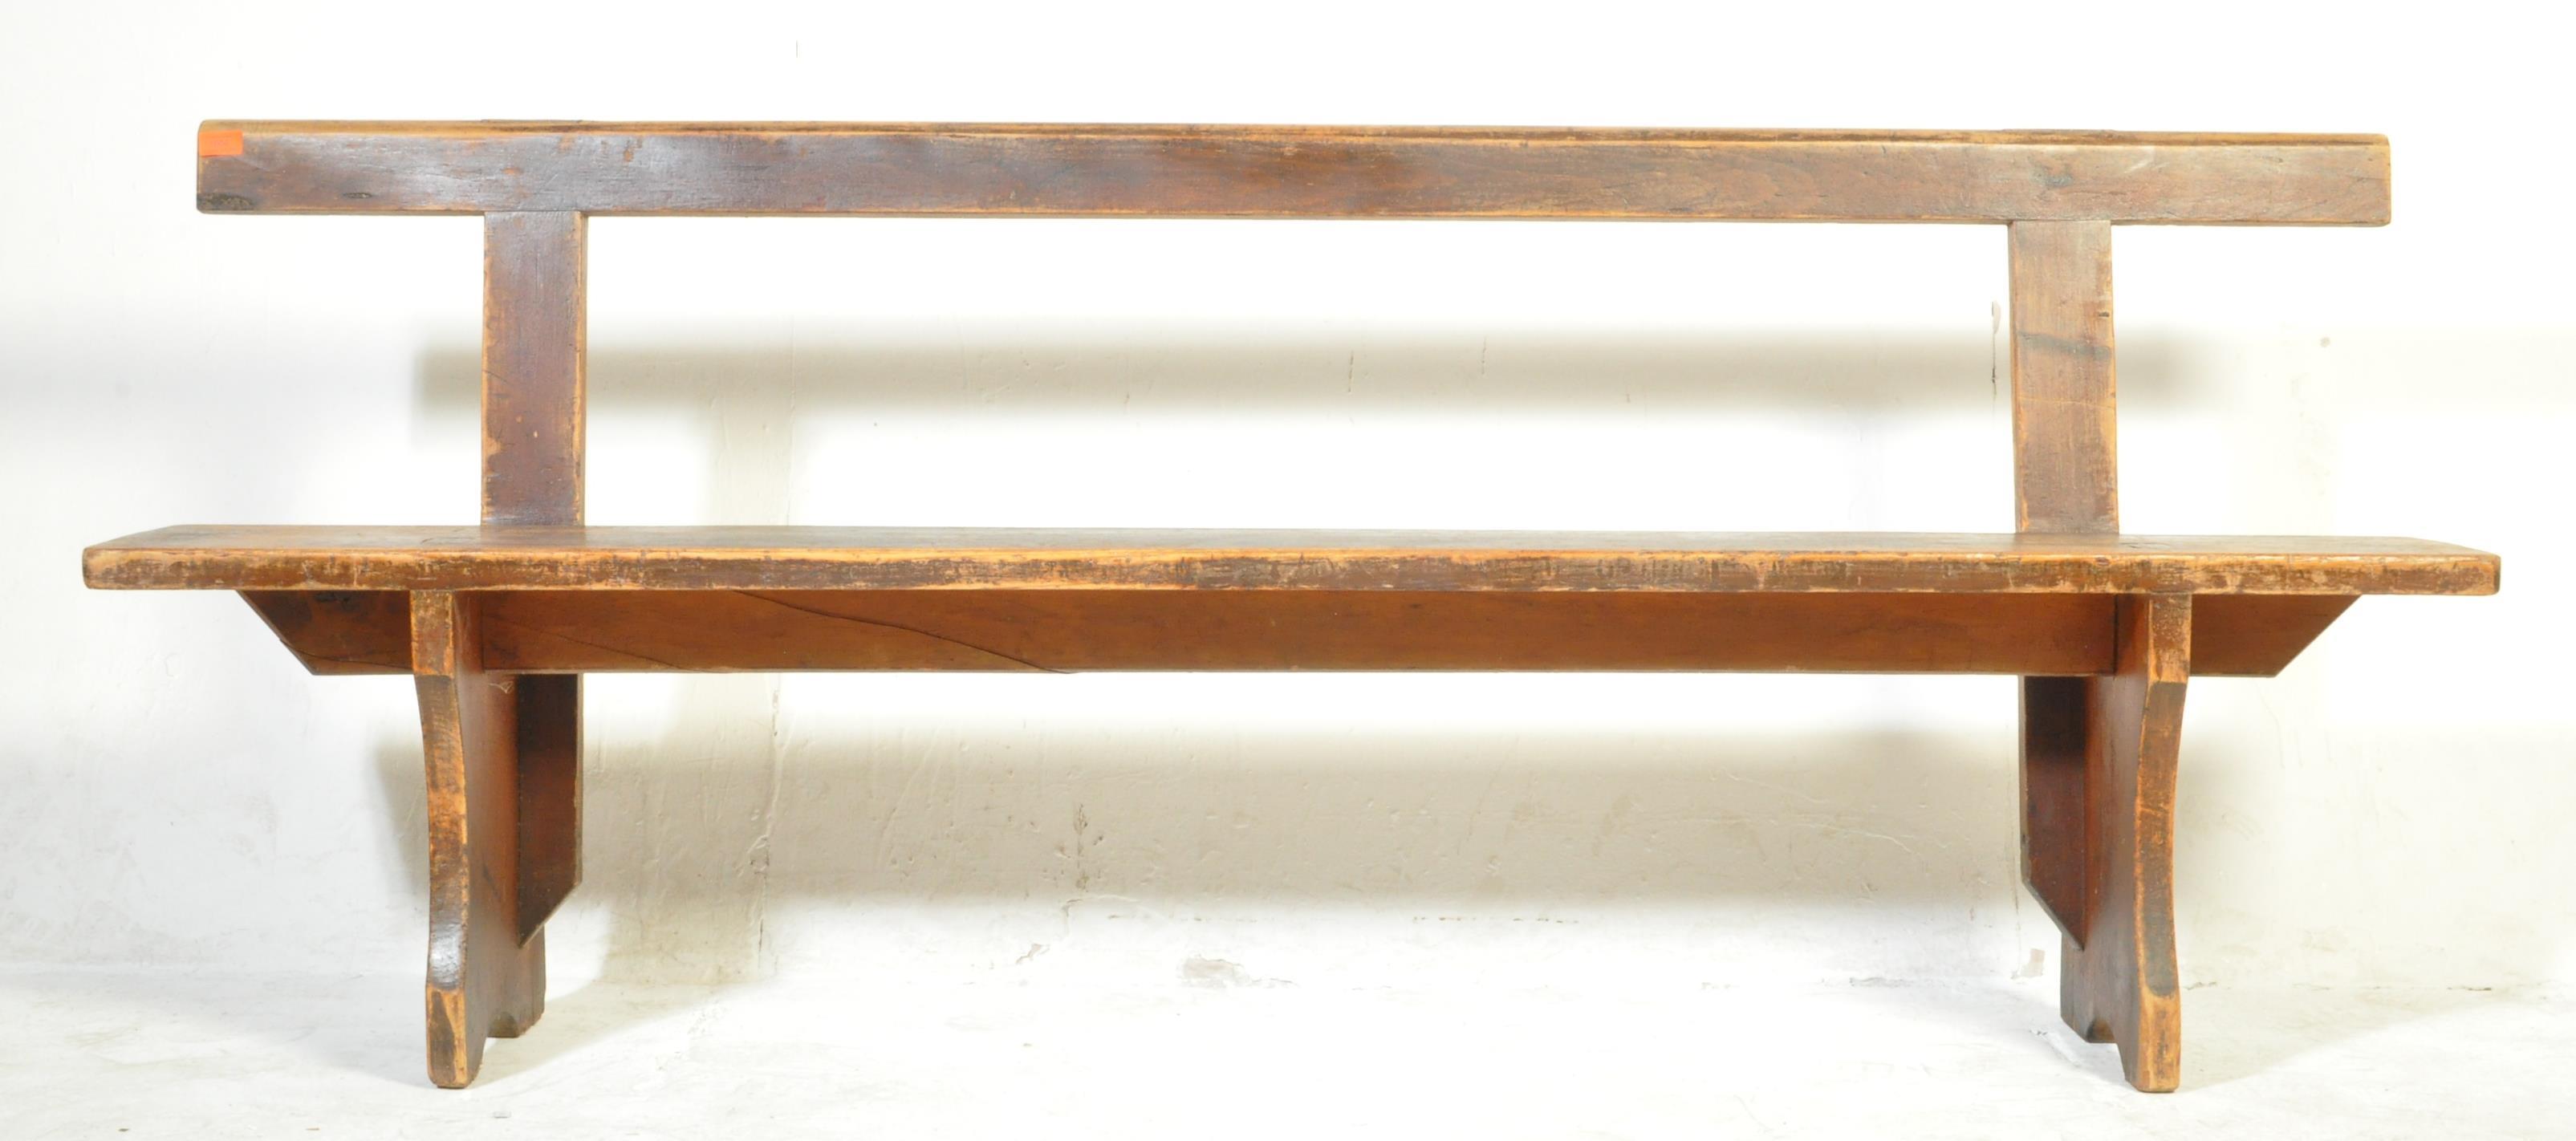 VINTAGE 20TH CENTURY PINE CHURCH ECCLESIATICAL BENCH - Image 2 of 5